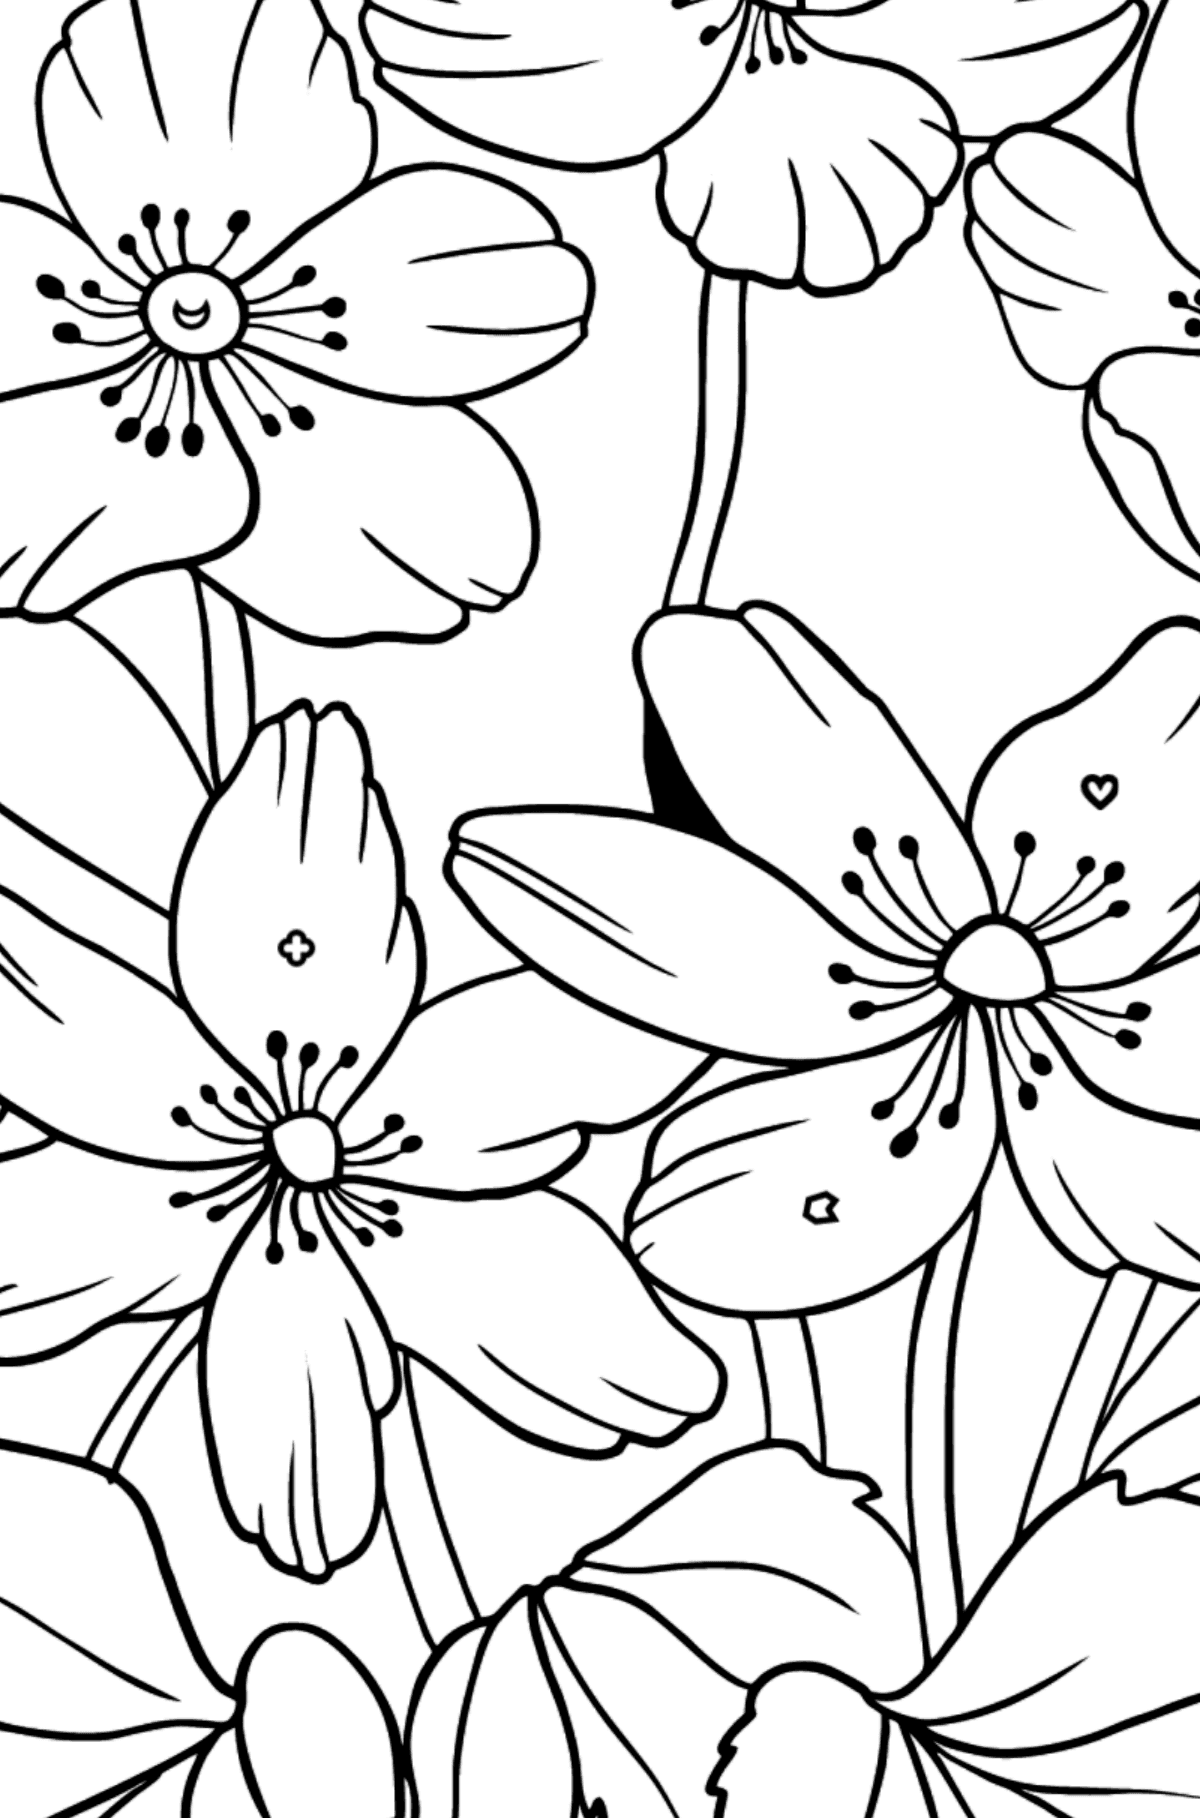 Flower Coloring Page - A Pastel Yellow Windflower - Coloring by Geometric Shapes for Kids